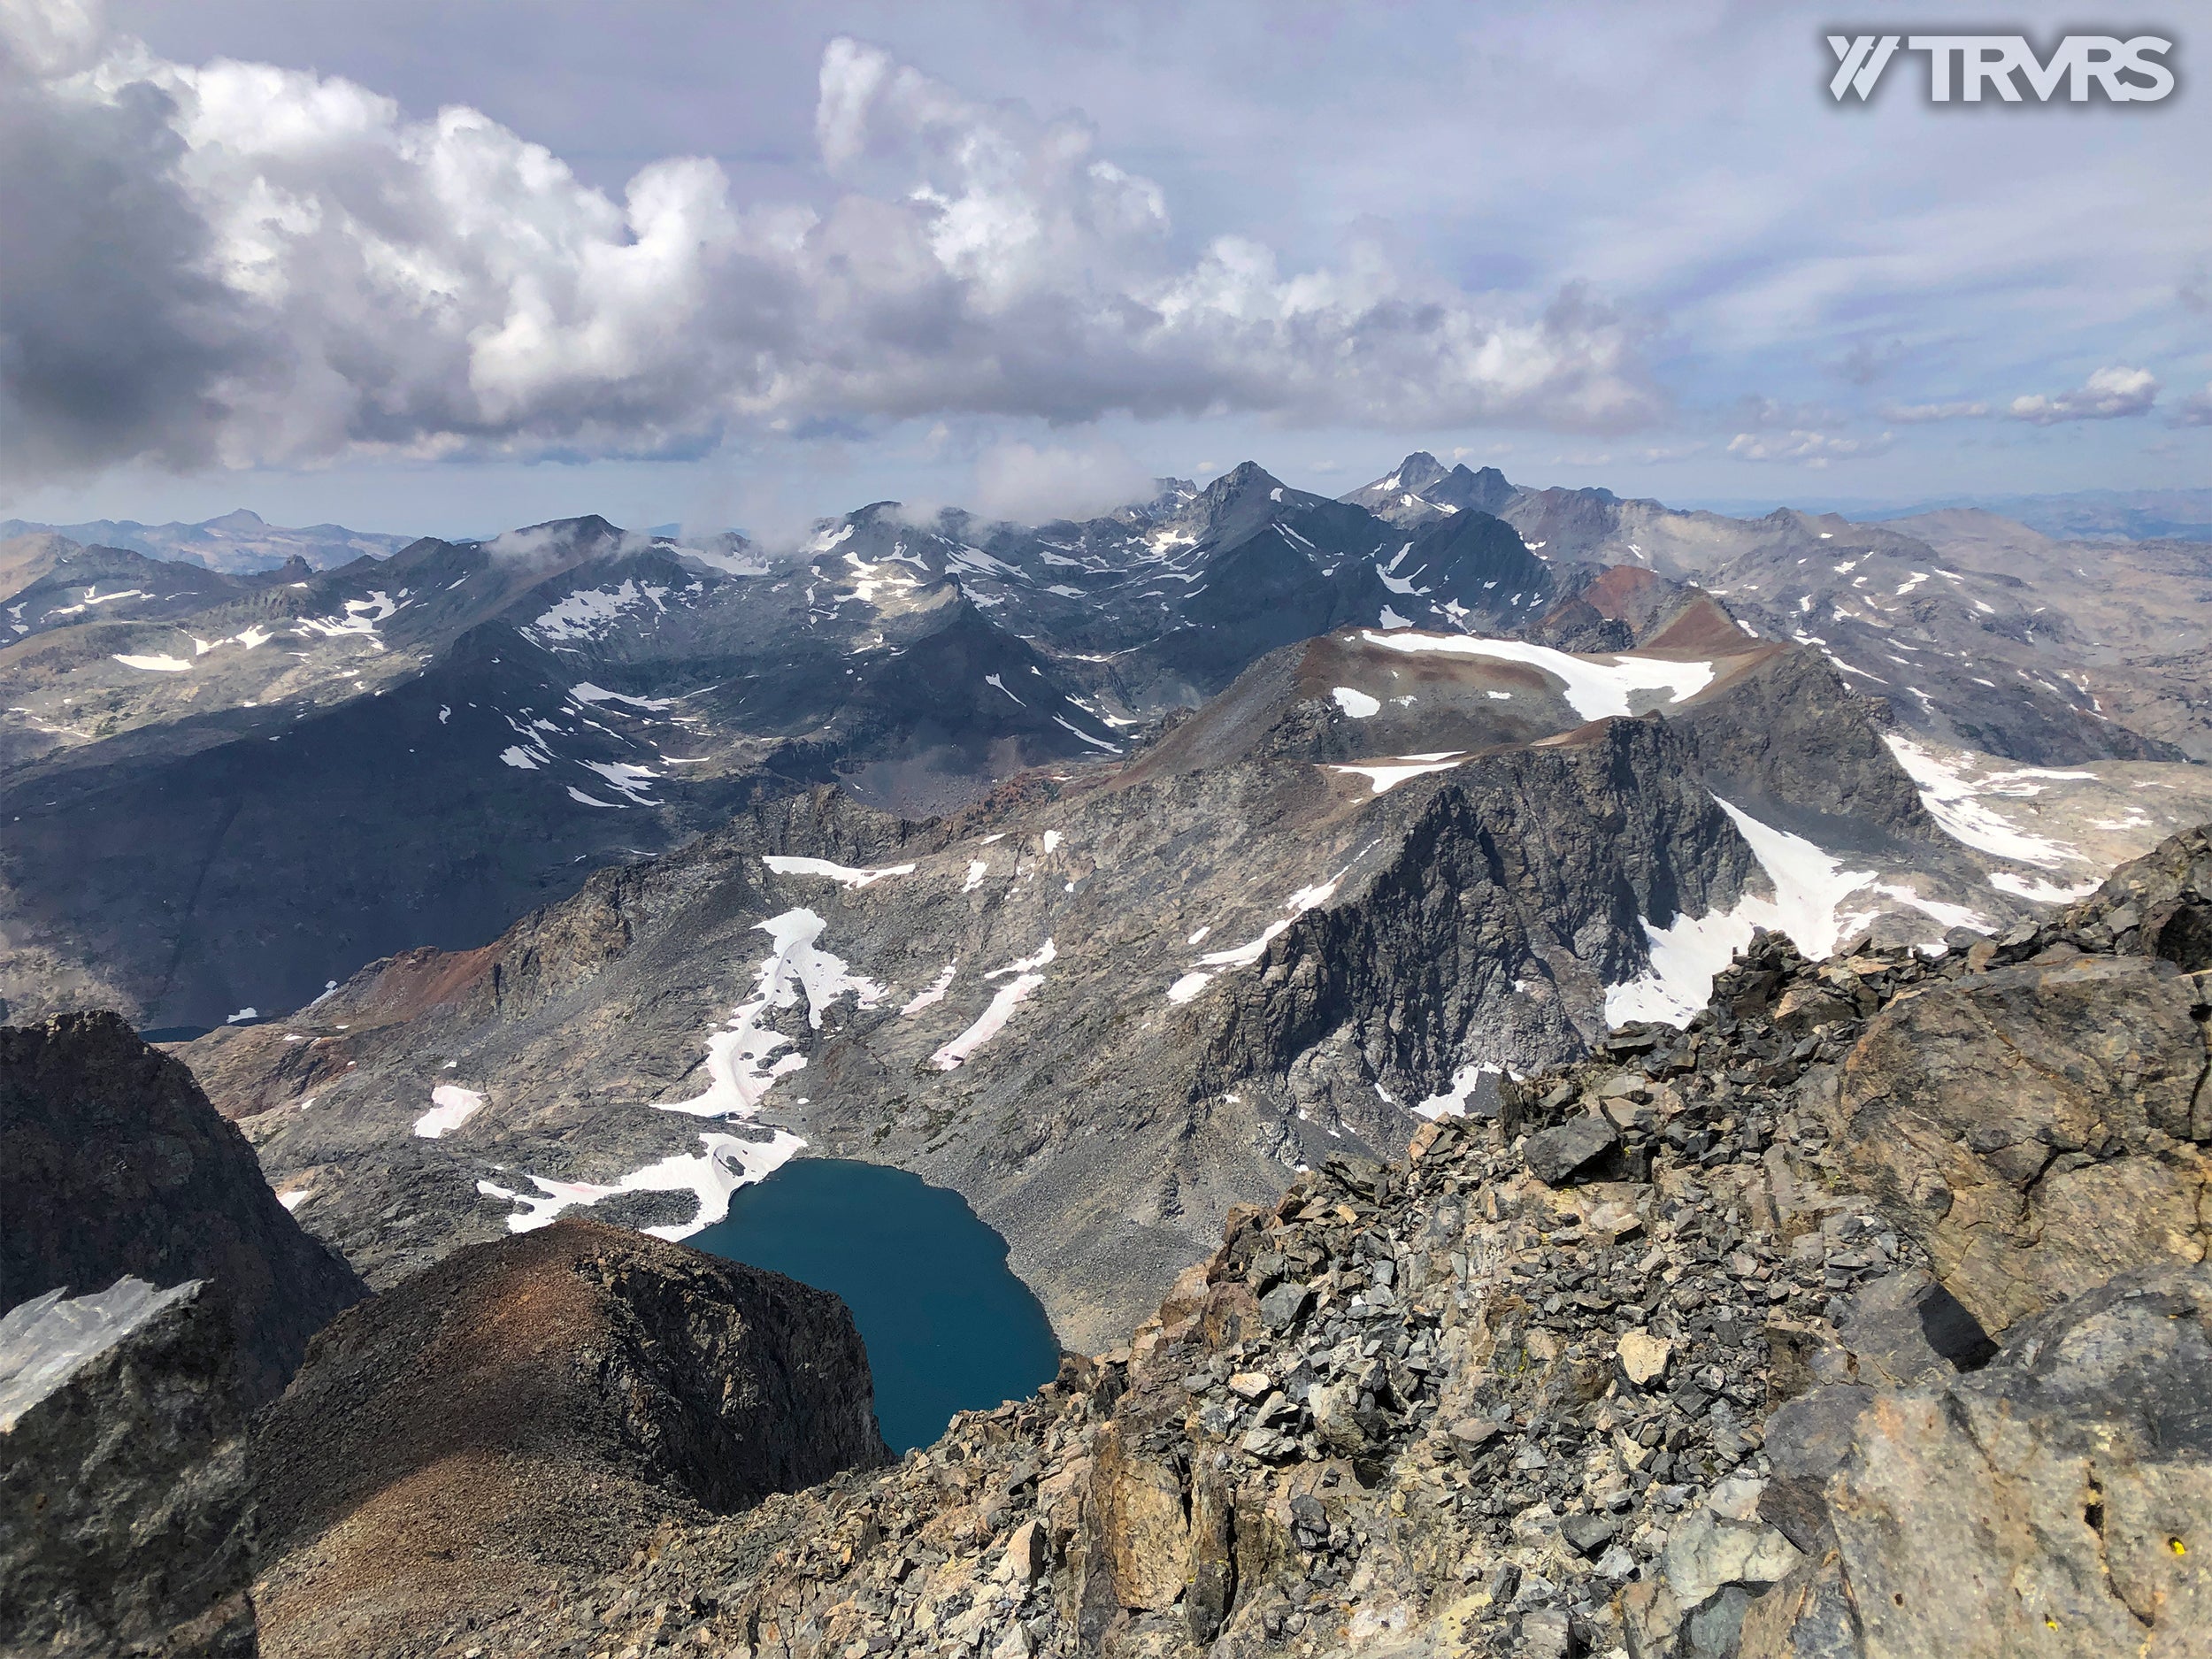 Looking West from Banner Peak - Ritter-Banner Saddle, Lake Catherine, Glacier Pass, Thousand Island Lake, River Trail, Pacific Crest Trail, Middle Fork, Agnew Meadow, Ansel Adams Wilderness, Mammoth Lakes, Sierra Nevada | TRVRS Apparel